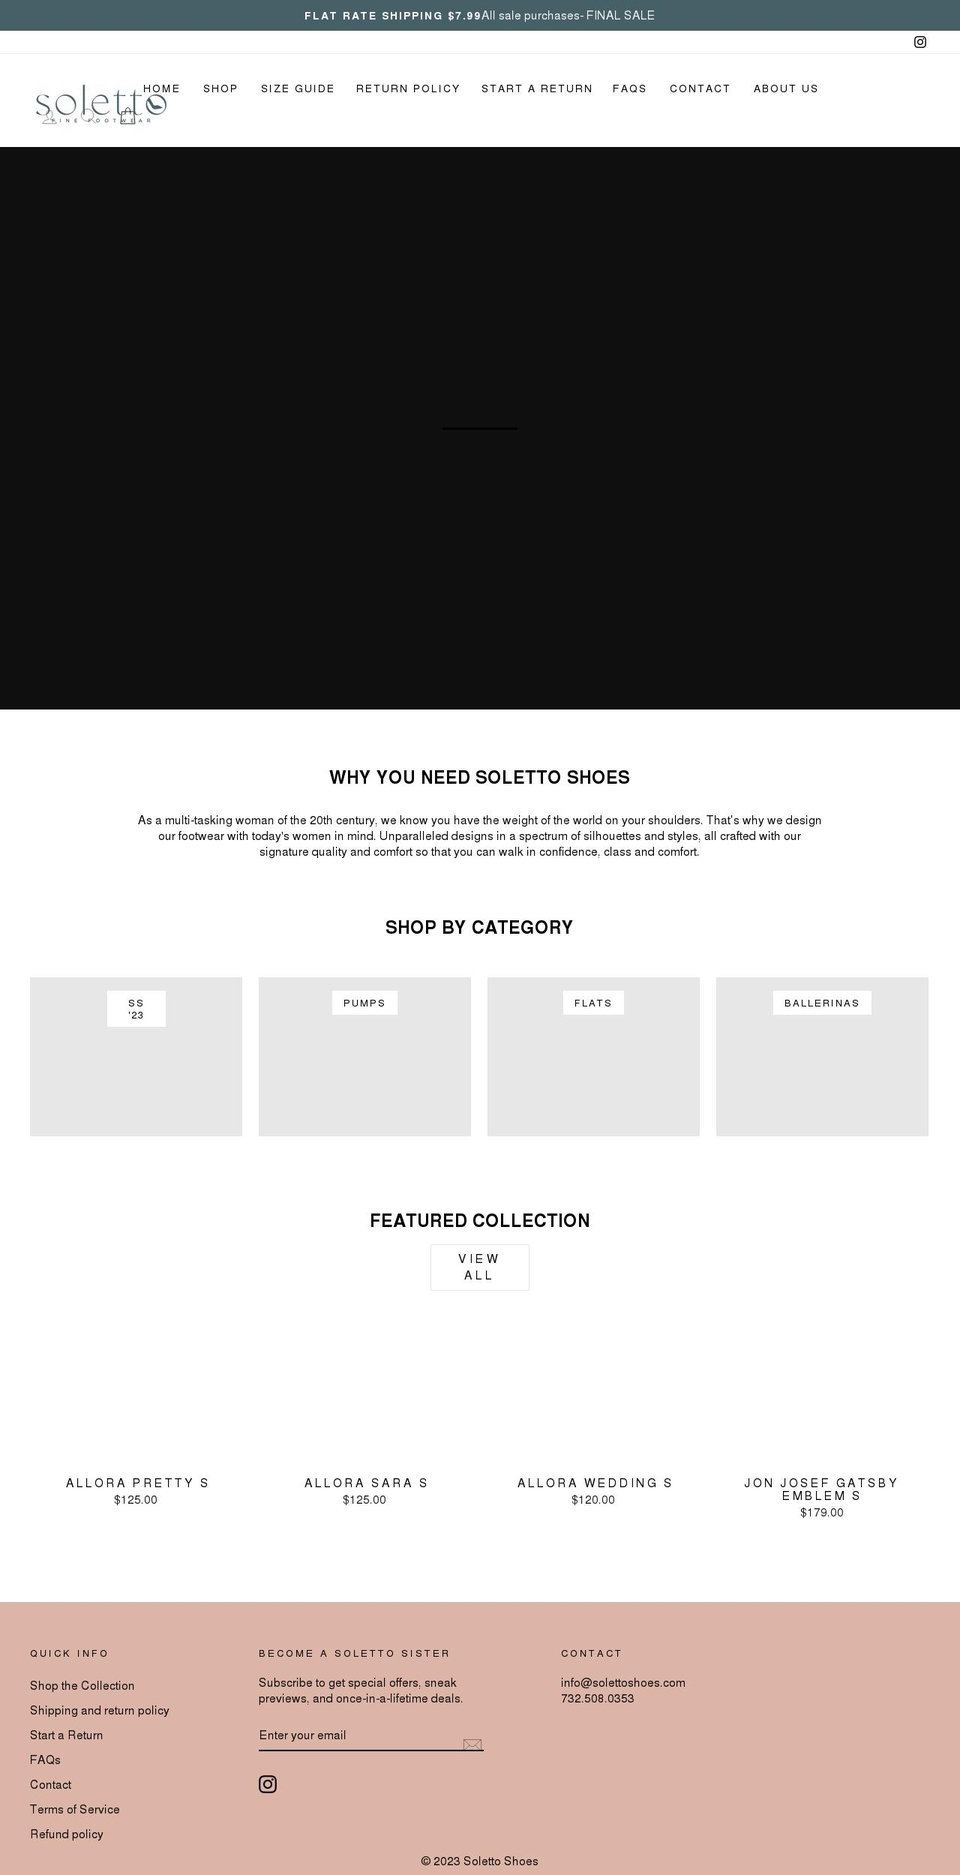 shoes Shopify theme site example solettoshoes.com